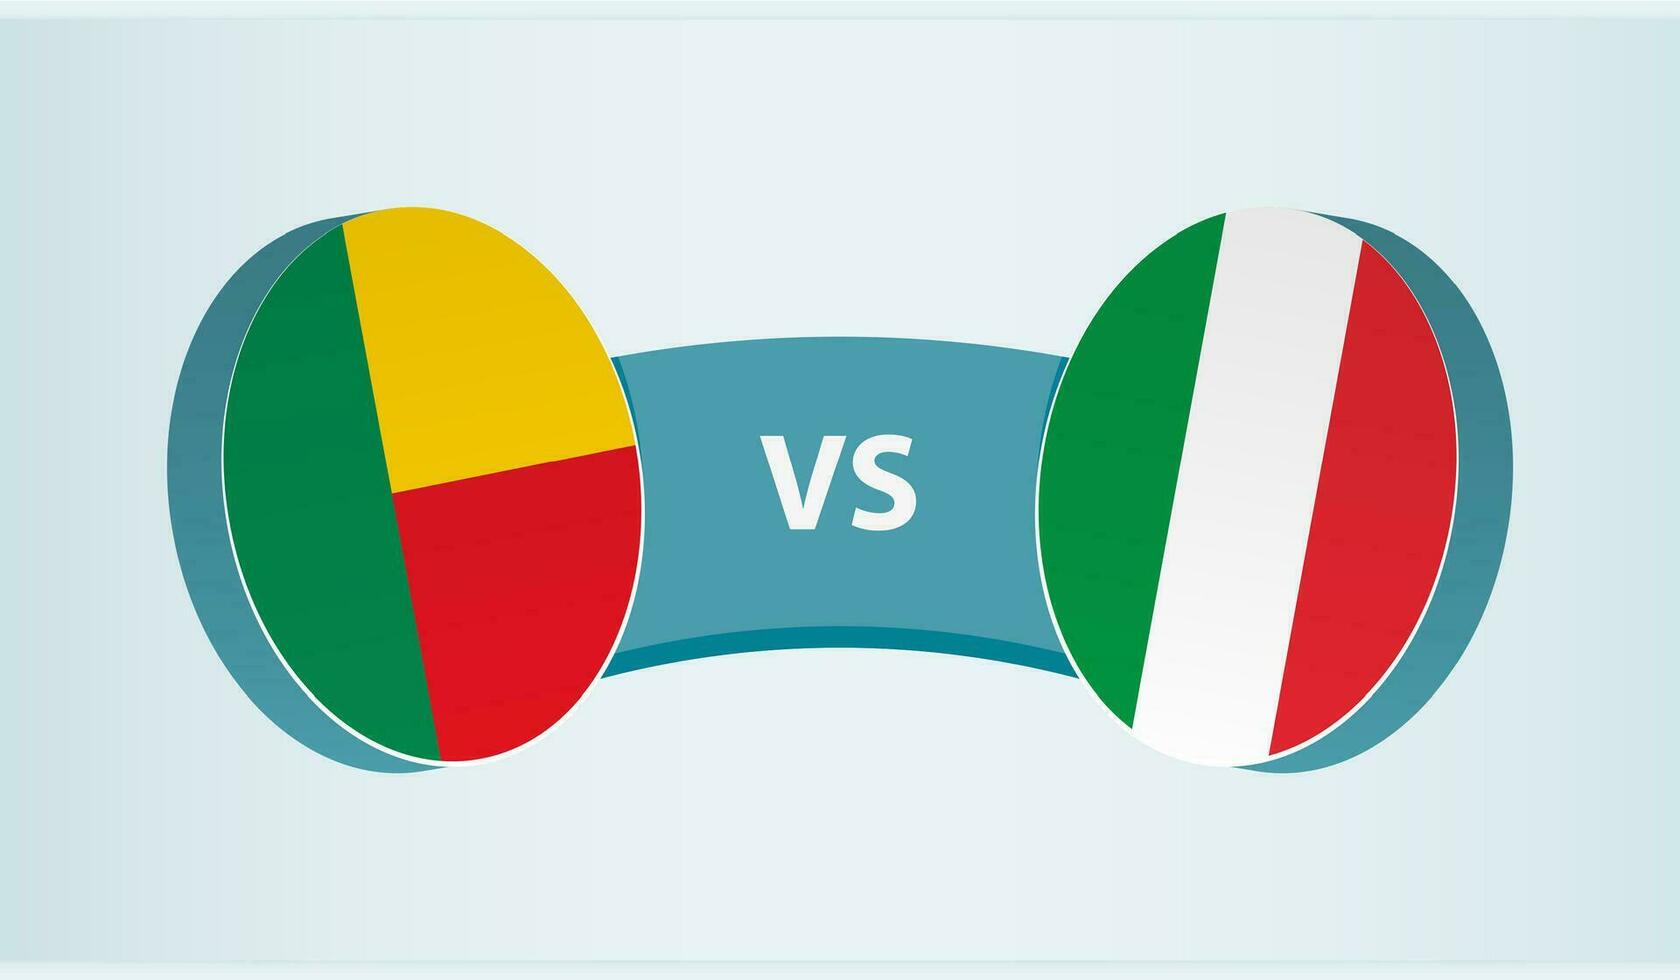 Benin versus Italy, team sports competition concept. vector